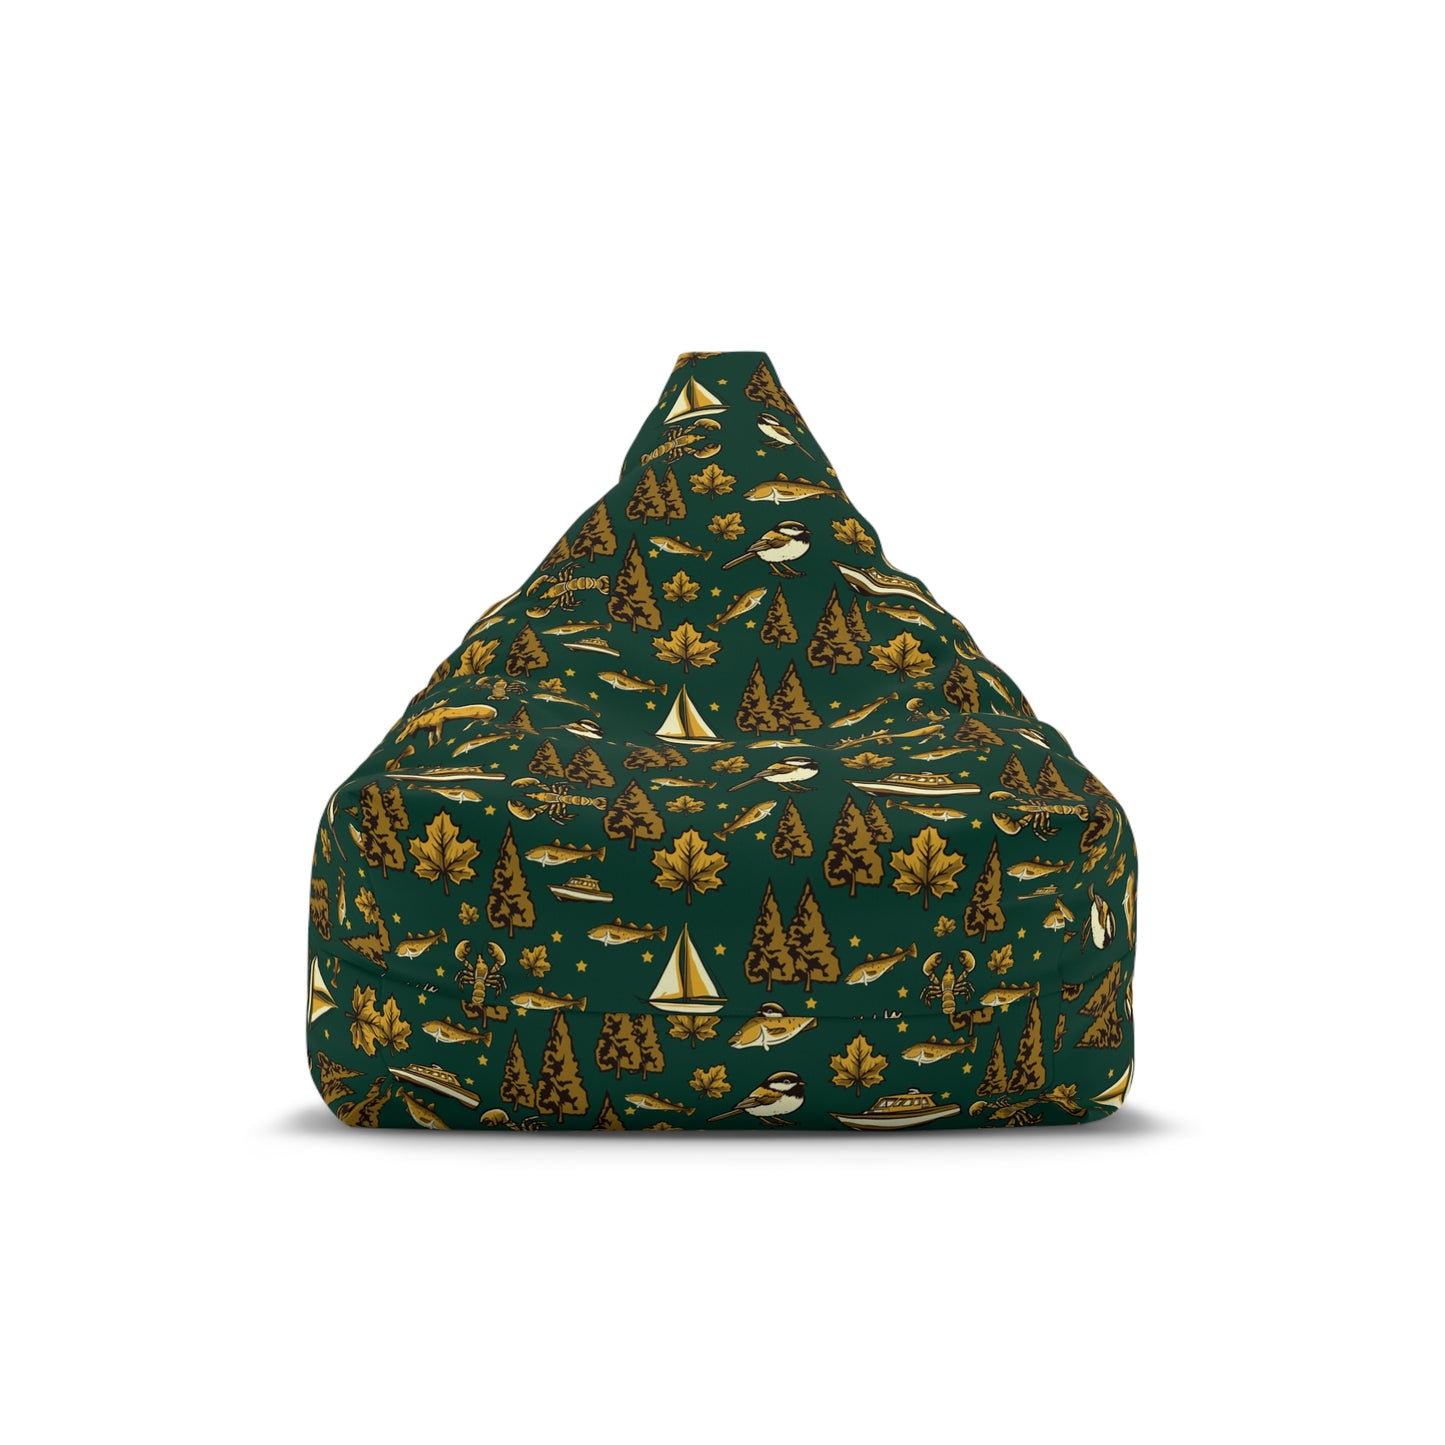 Maine Camp Fabric - Fill Yourself Bean Bag Chair Cover (Filling Not Included - link to fill available)